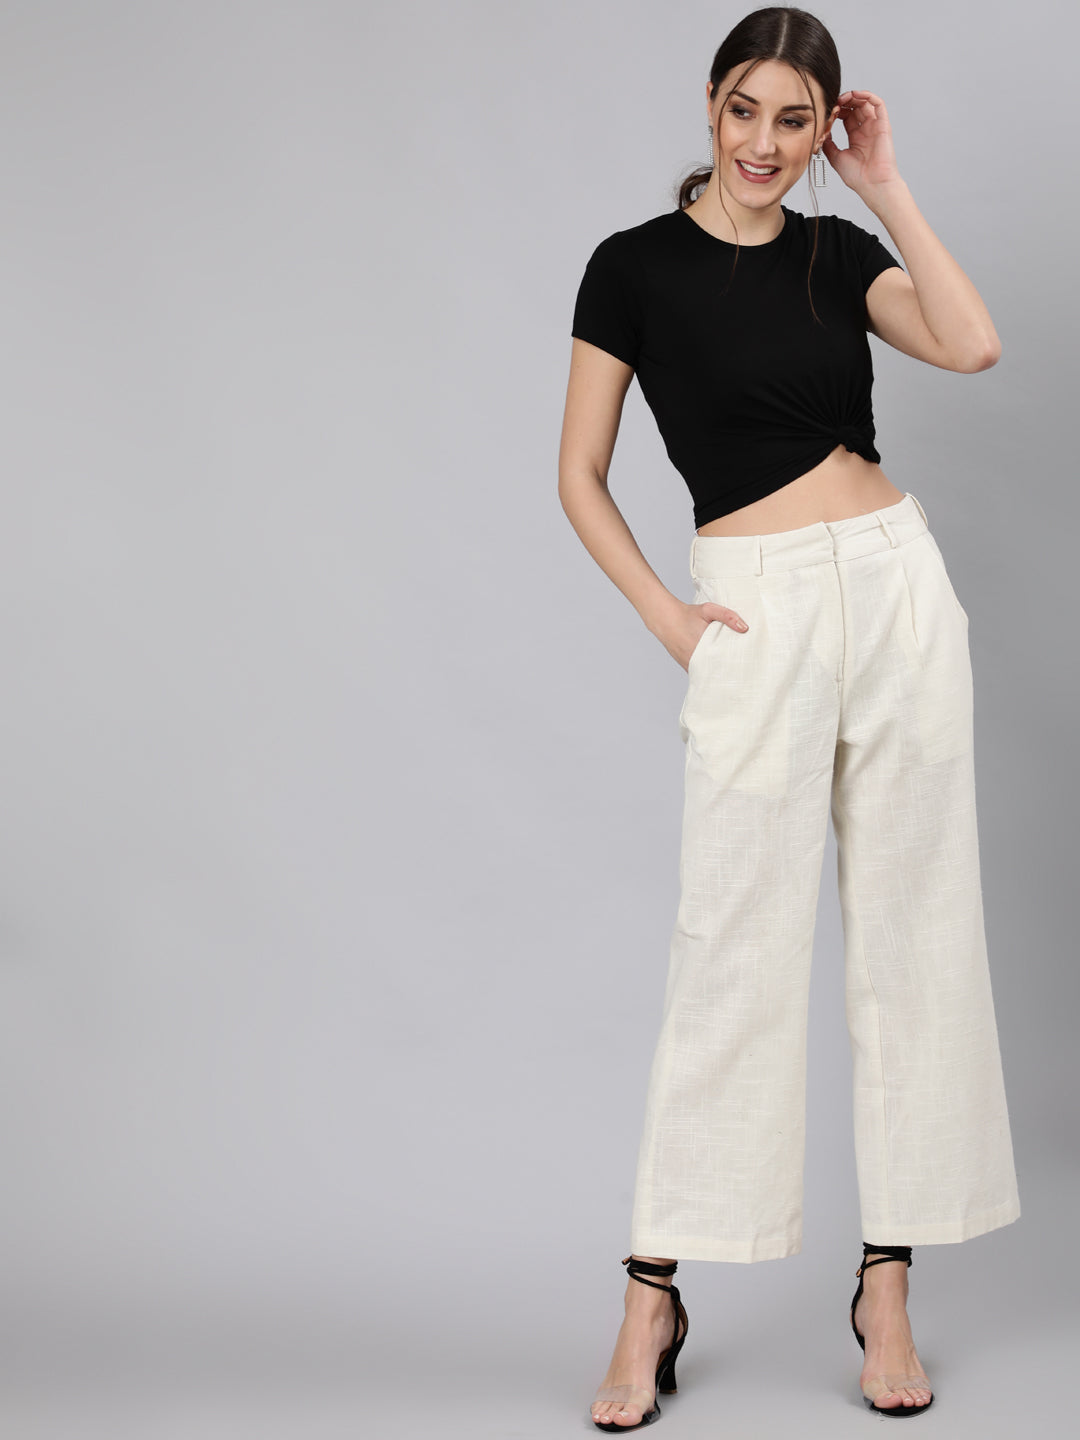 Get Ankle Length Pants for Women 